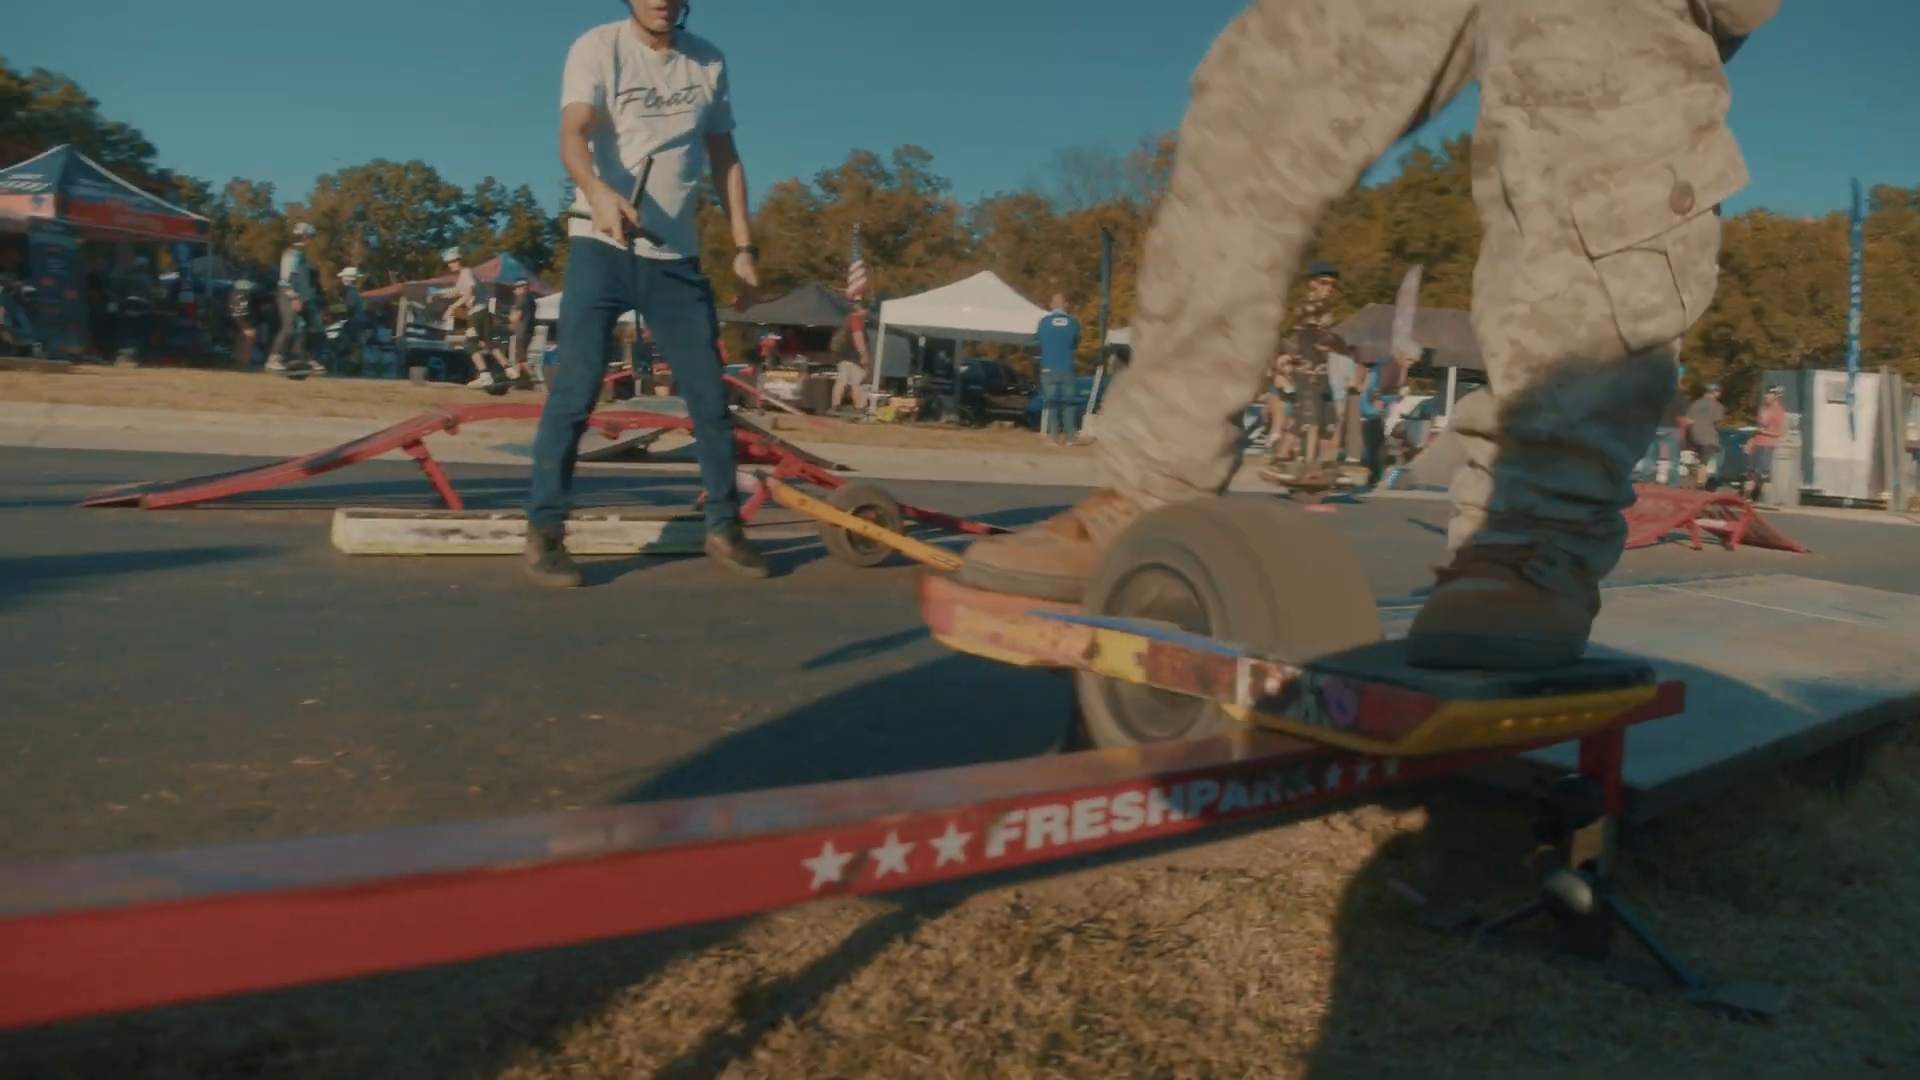 Onewheel Jump and Tricks with ramps and grind rails at floatlife fest